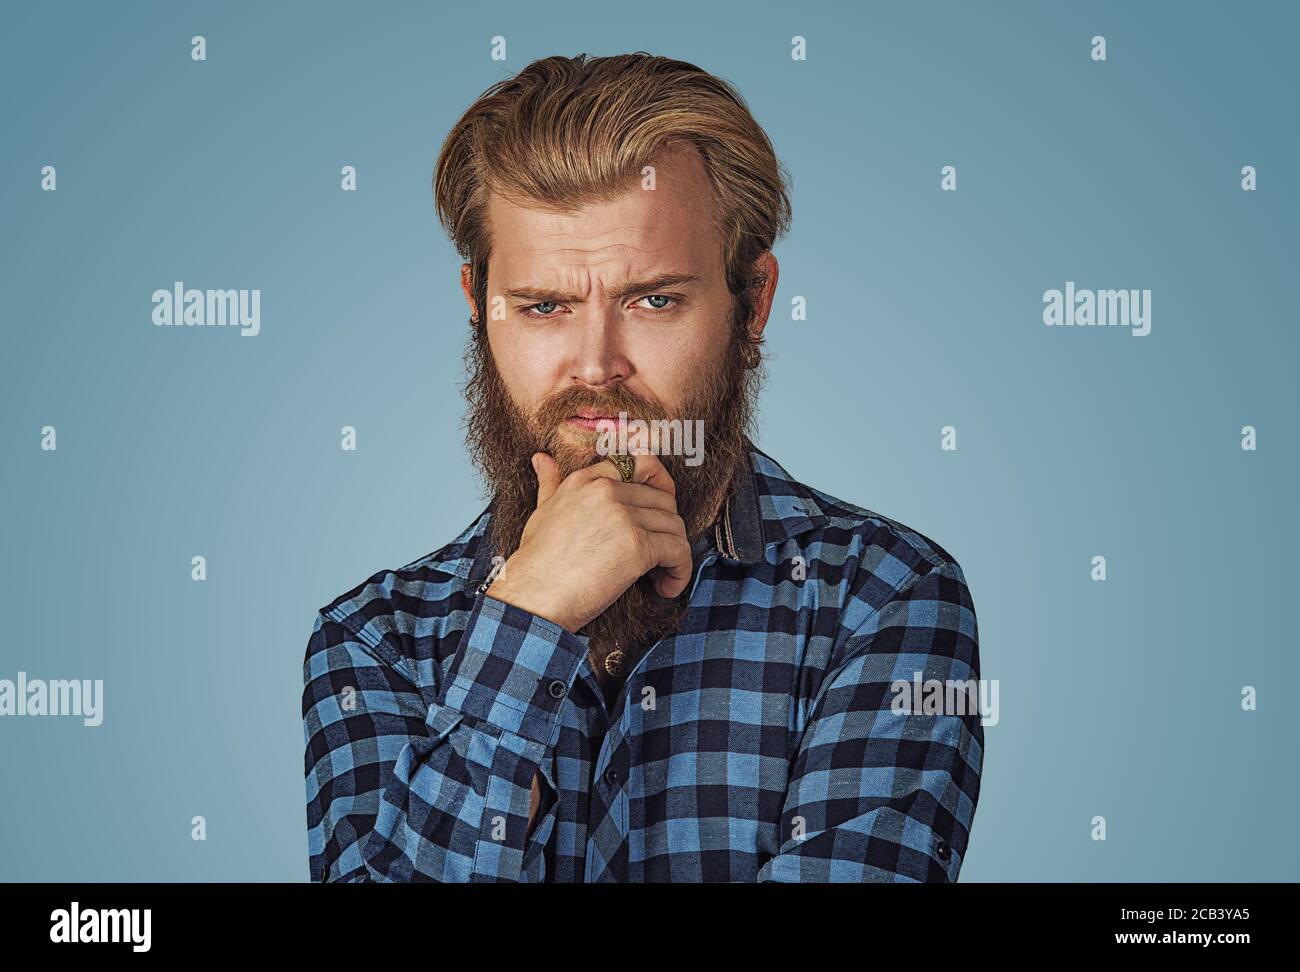 Frowning man thinking expressing doubts and concerns. Hipster male with beard in blue plaid checkered shirt  Isolated on blue studio Background. Negat Stock Photo